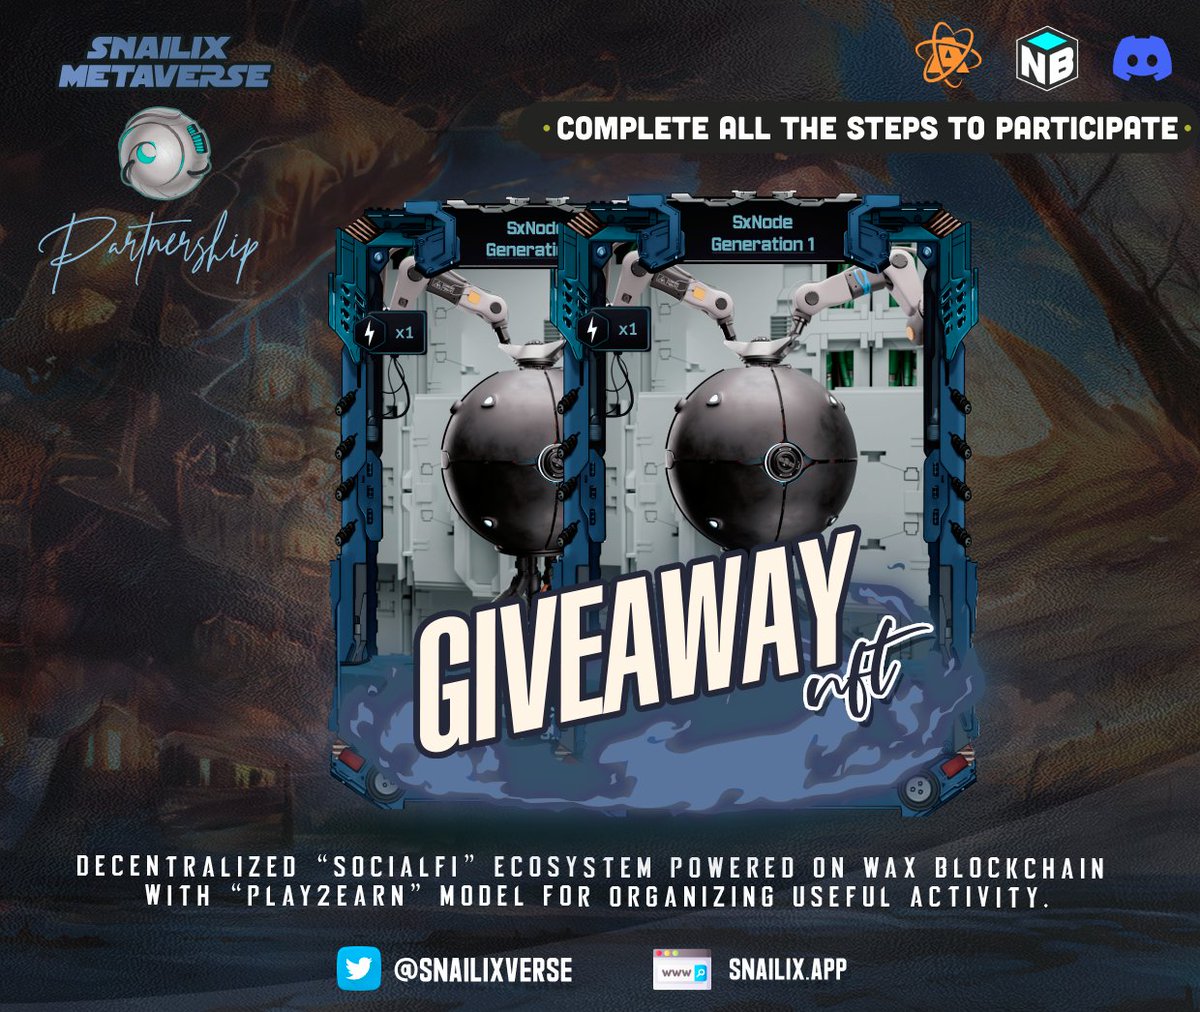 🚀#Snailix Metaverse 'Mining Equipment Giveaway'

🏆2x 'SxNode Generation 1'

1️⃣heart and retweet this post!
2️⃣Follow @snailixverse!
3️⃣Tag 3 friends!
4️⃣Join! discord.gg/Ab2TEqCPEd

💬Comment: WAX & Discord ID
🎯Ends in 72h!

#WAX #SocialFi #NFT #Help2Earn #GameFi #P2EGames #P2E